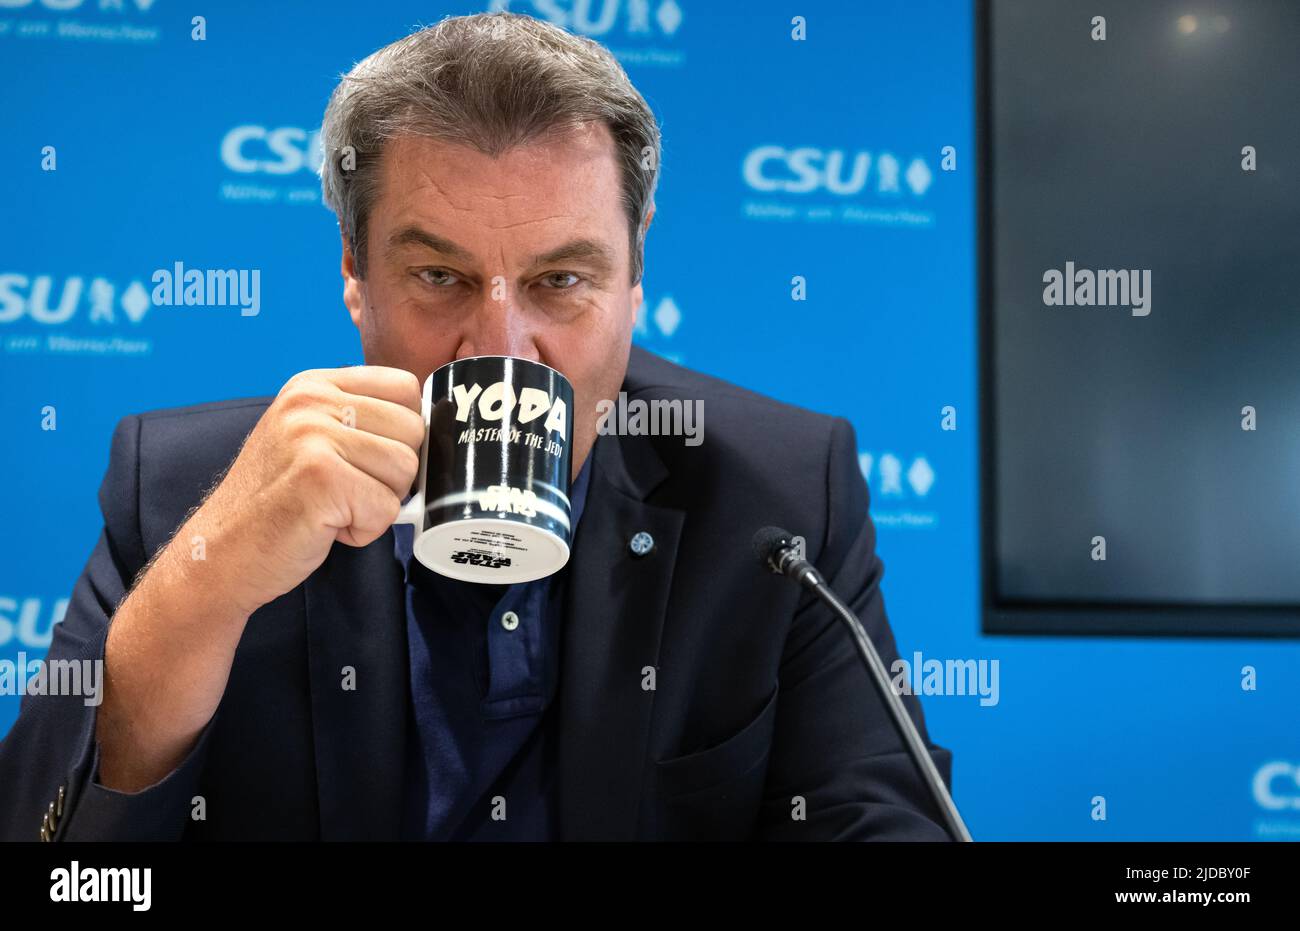 Munich, Germany. 20th June, 2022. Markus Söder, chairman of the CSU and prime minister of Bavaria, attends a meeting of the CSU executive board at party headquarters. Söder is holding a mug with the inscription 'Yoda - Master of the Jedi'. Credit: Sven Hoppe/dpa/Alamy Live News Stock Photo